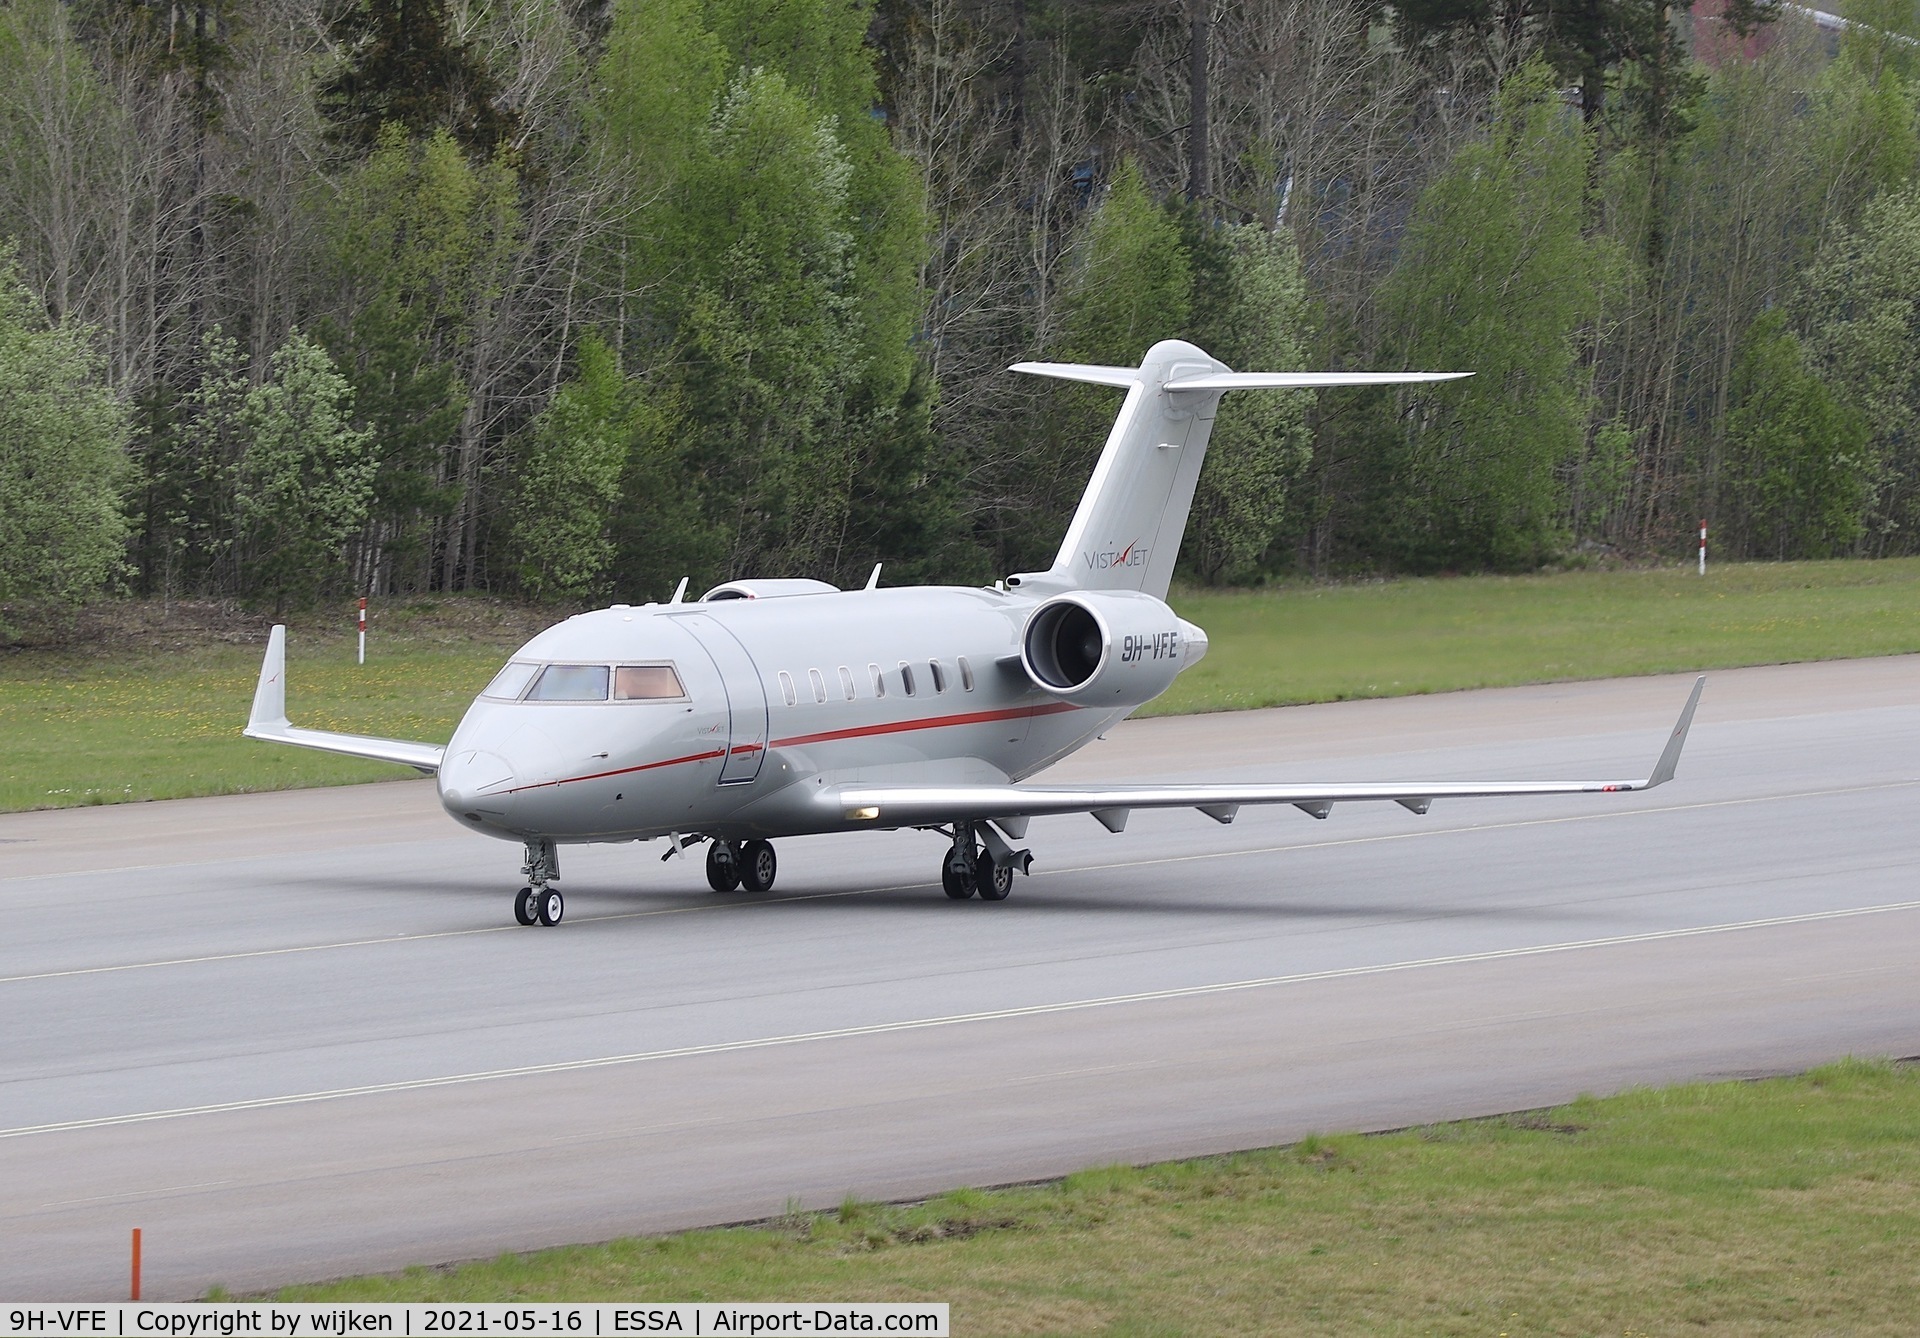 9H-VFE, 2014 Bombardier Challenger 605 (CL-600-2B16) C/N 5974, Taxiway W